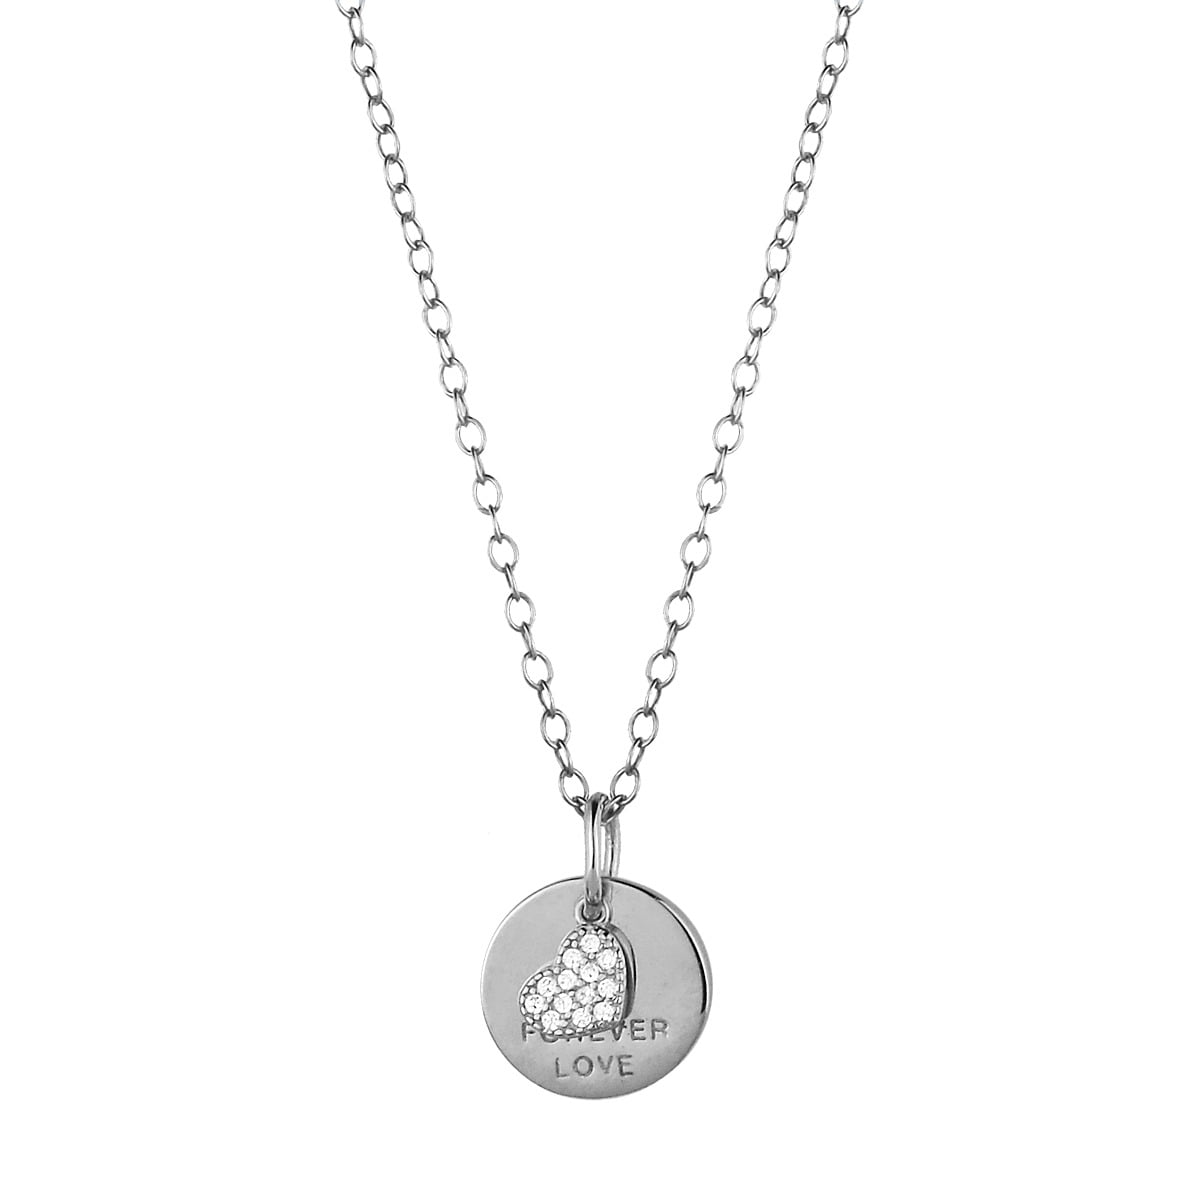 Pendant made of platinum plated silver 925° with hidden message Forever Love and heart decorated with white zircons. Accompanied by a silver chain.